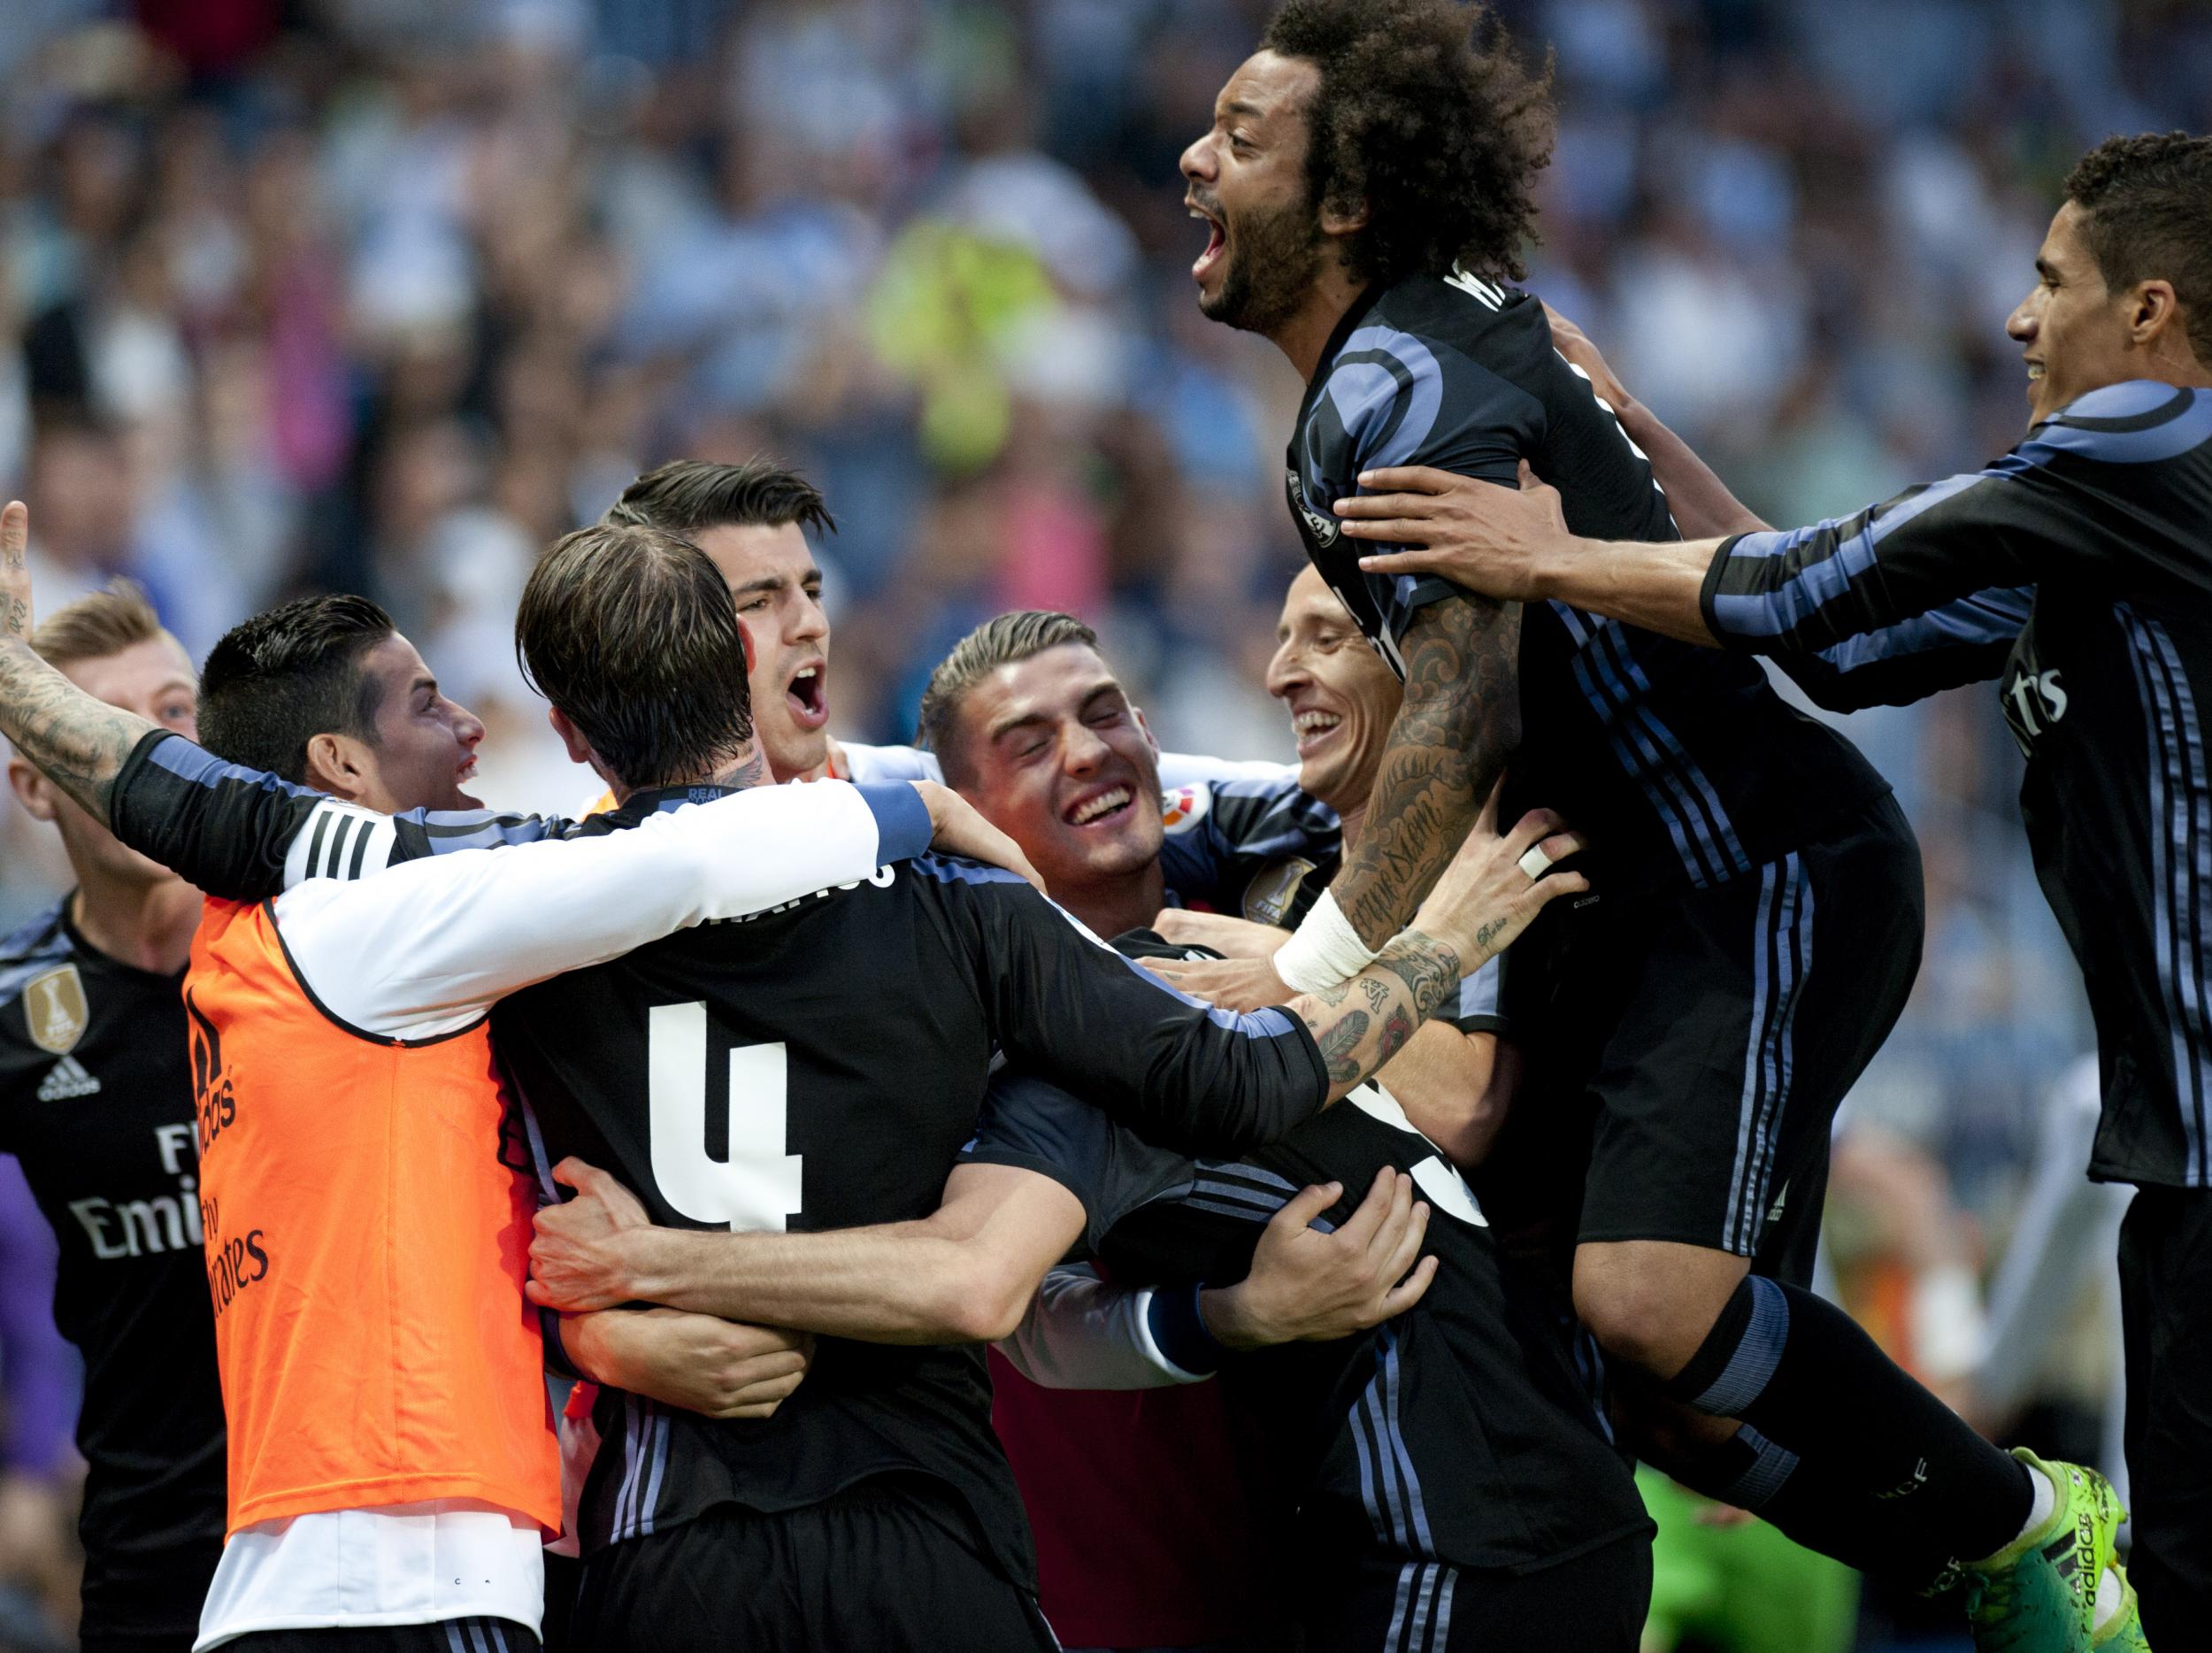 Real Madrid celebrate their first league title since 2011/12